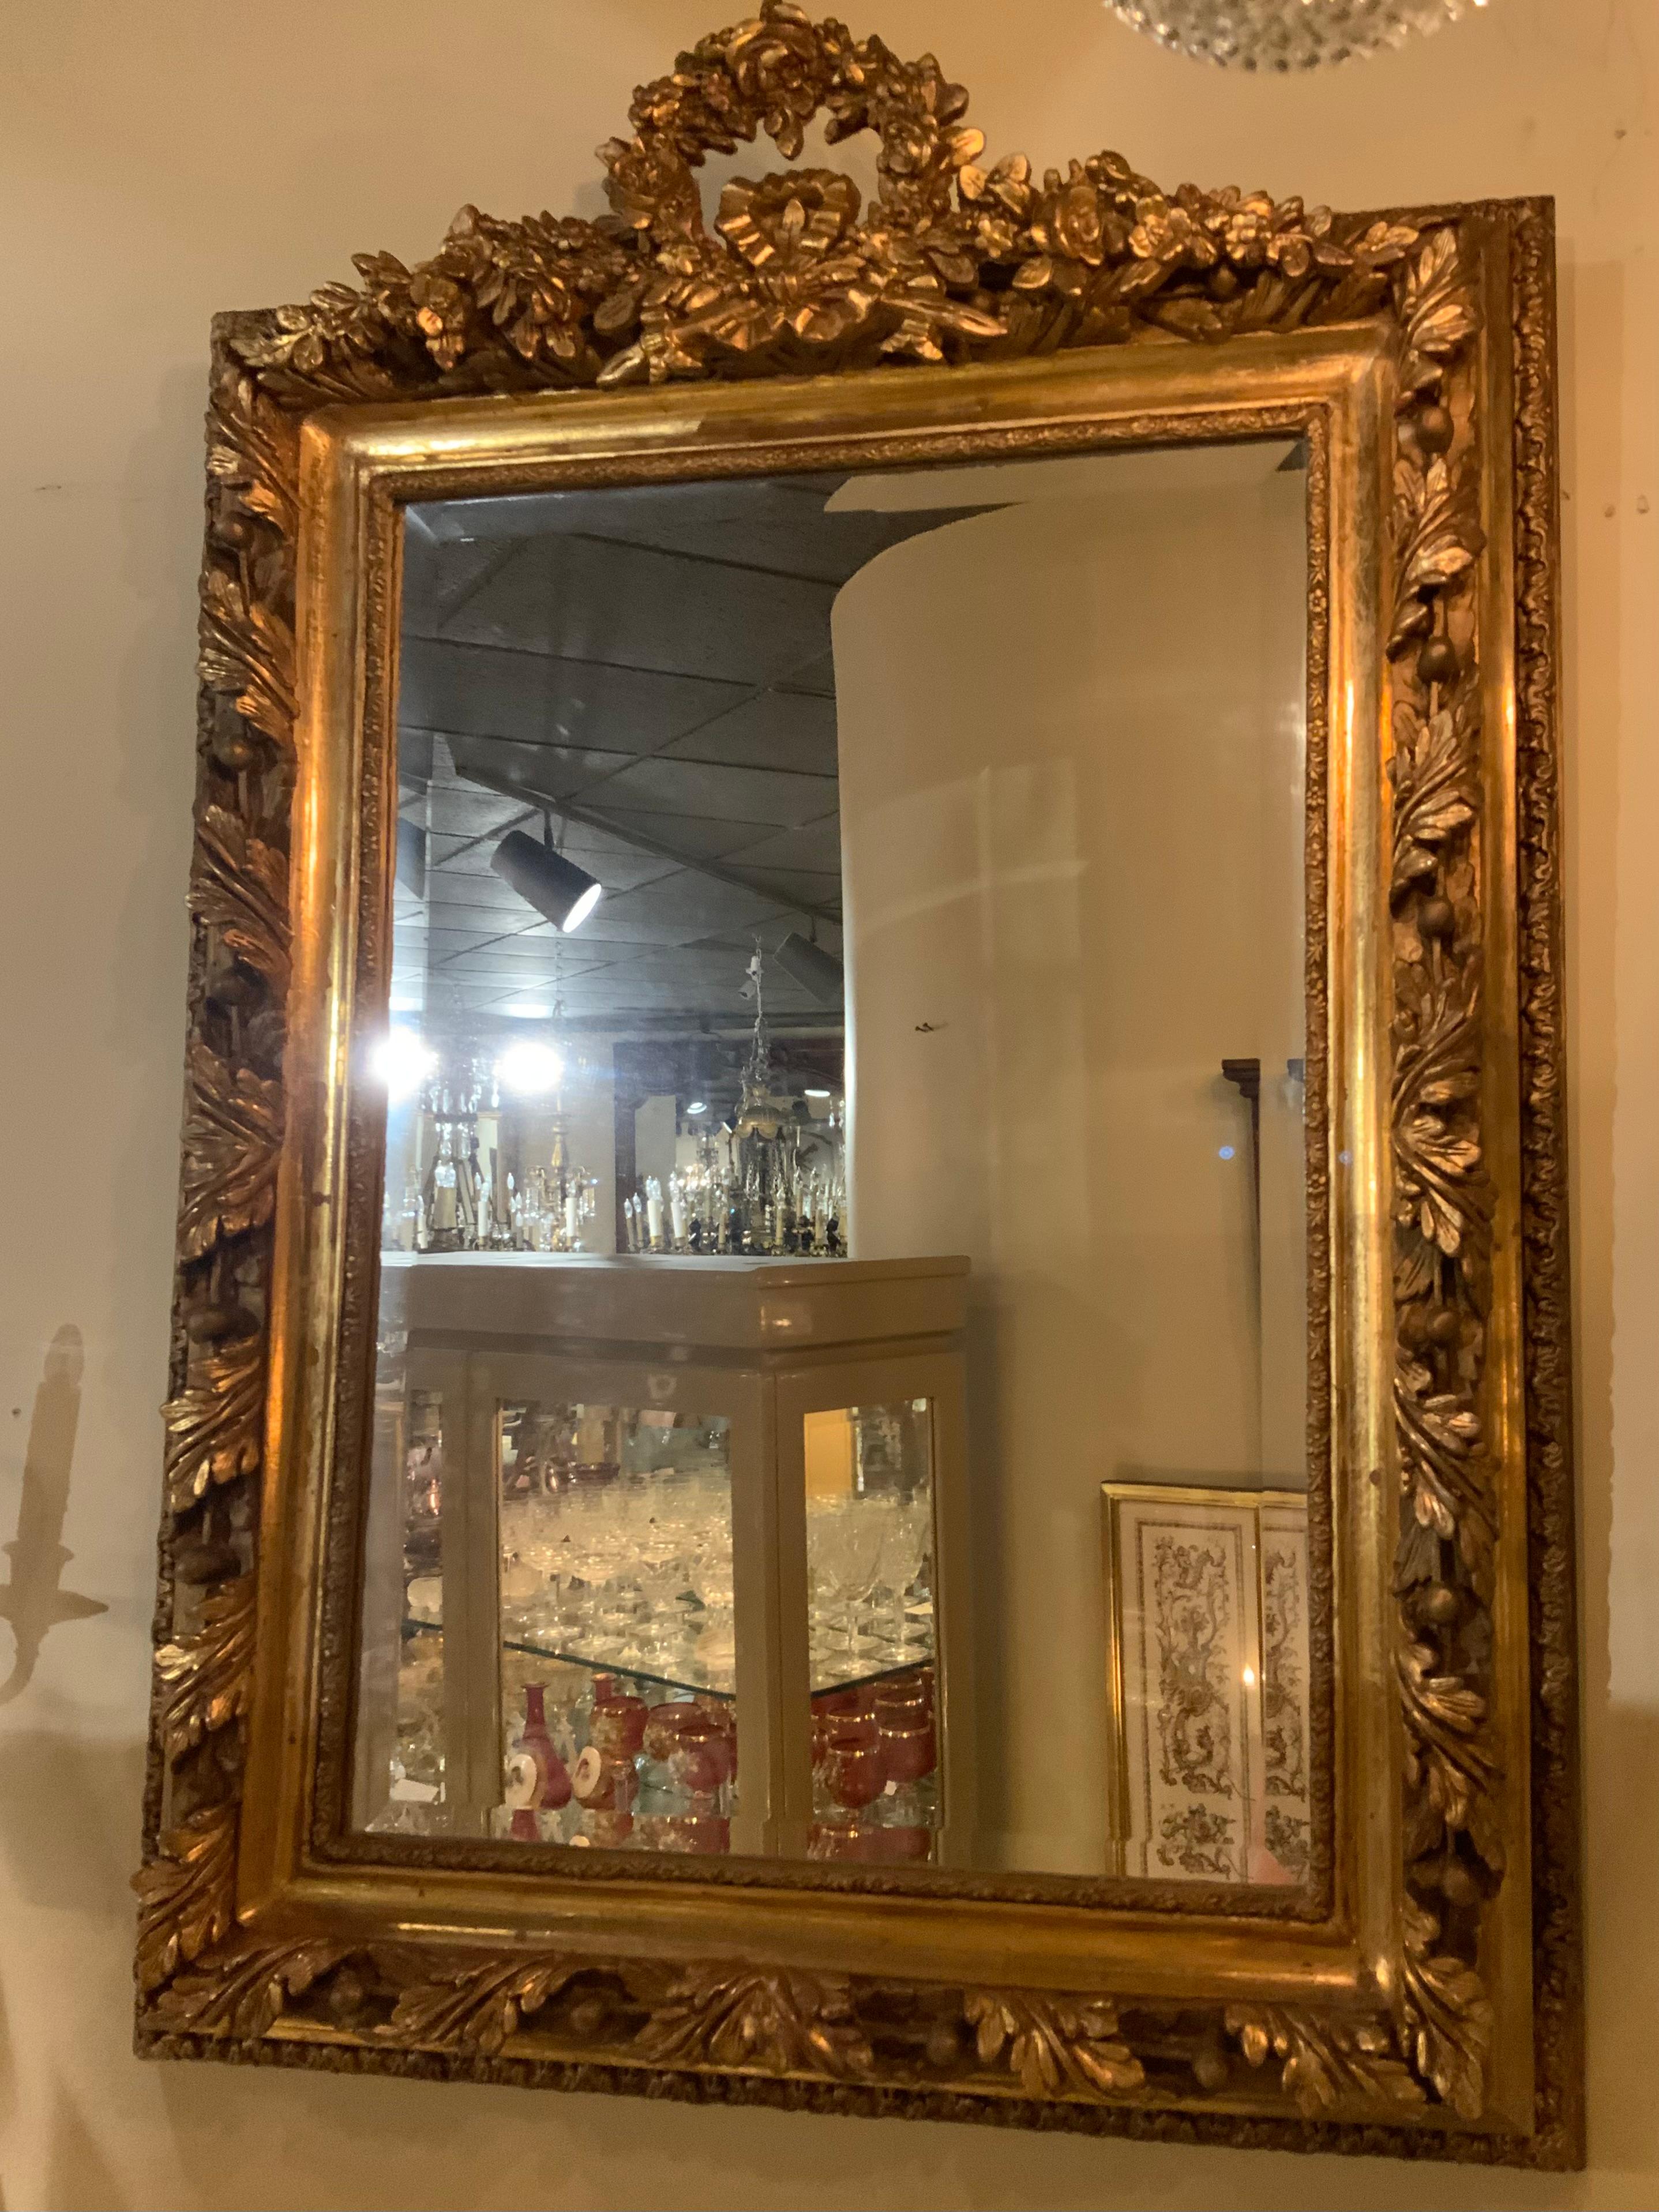 Giltwood with a floral wreath form  crest with floral sprays and a
Central ribbon bow not, the outer frame deeply molded with
Leaf and acorn motifs and set with a beveled plate glass mirror.